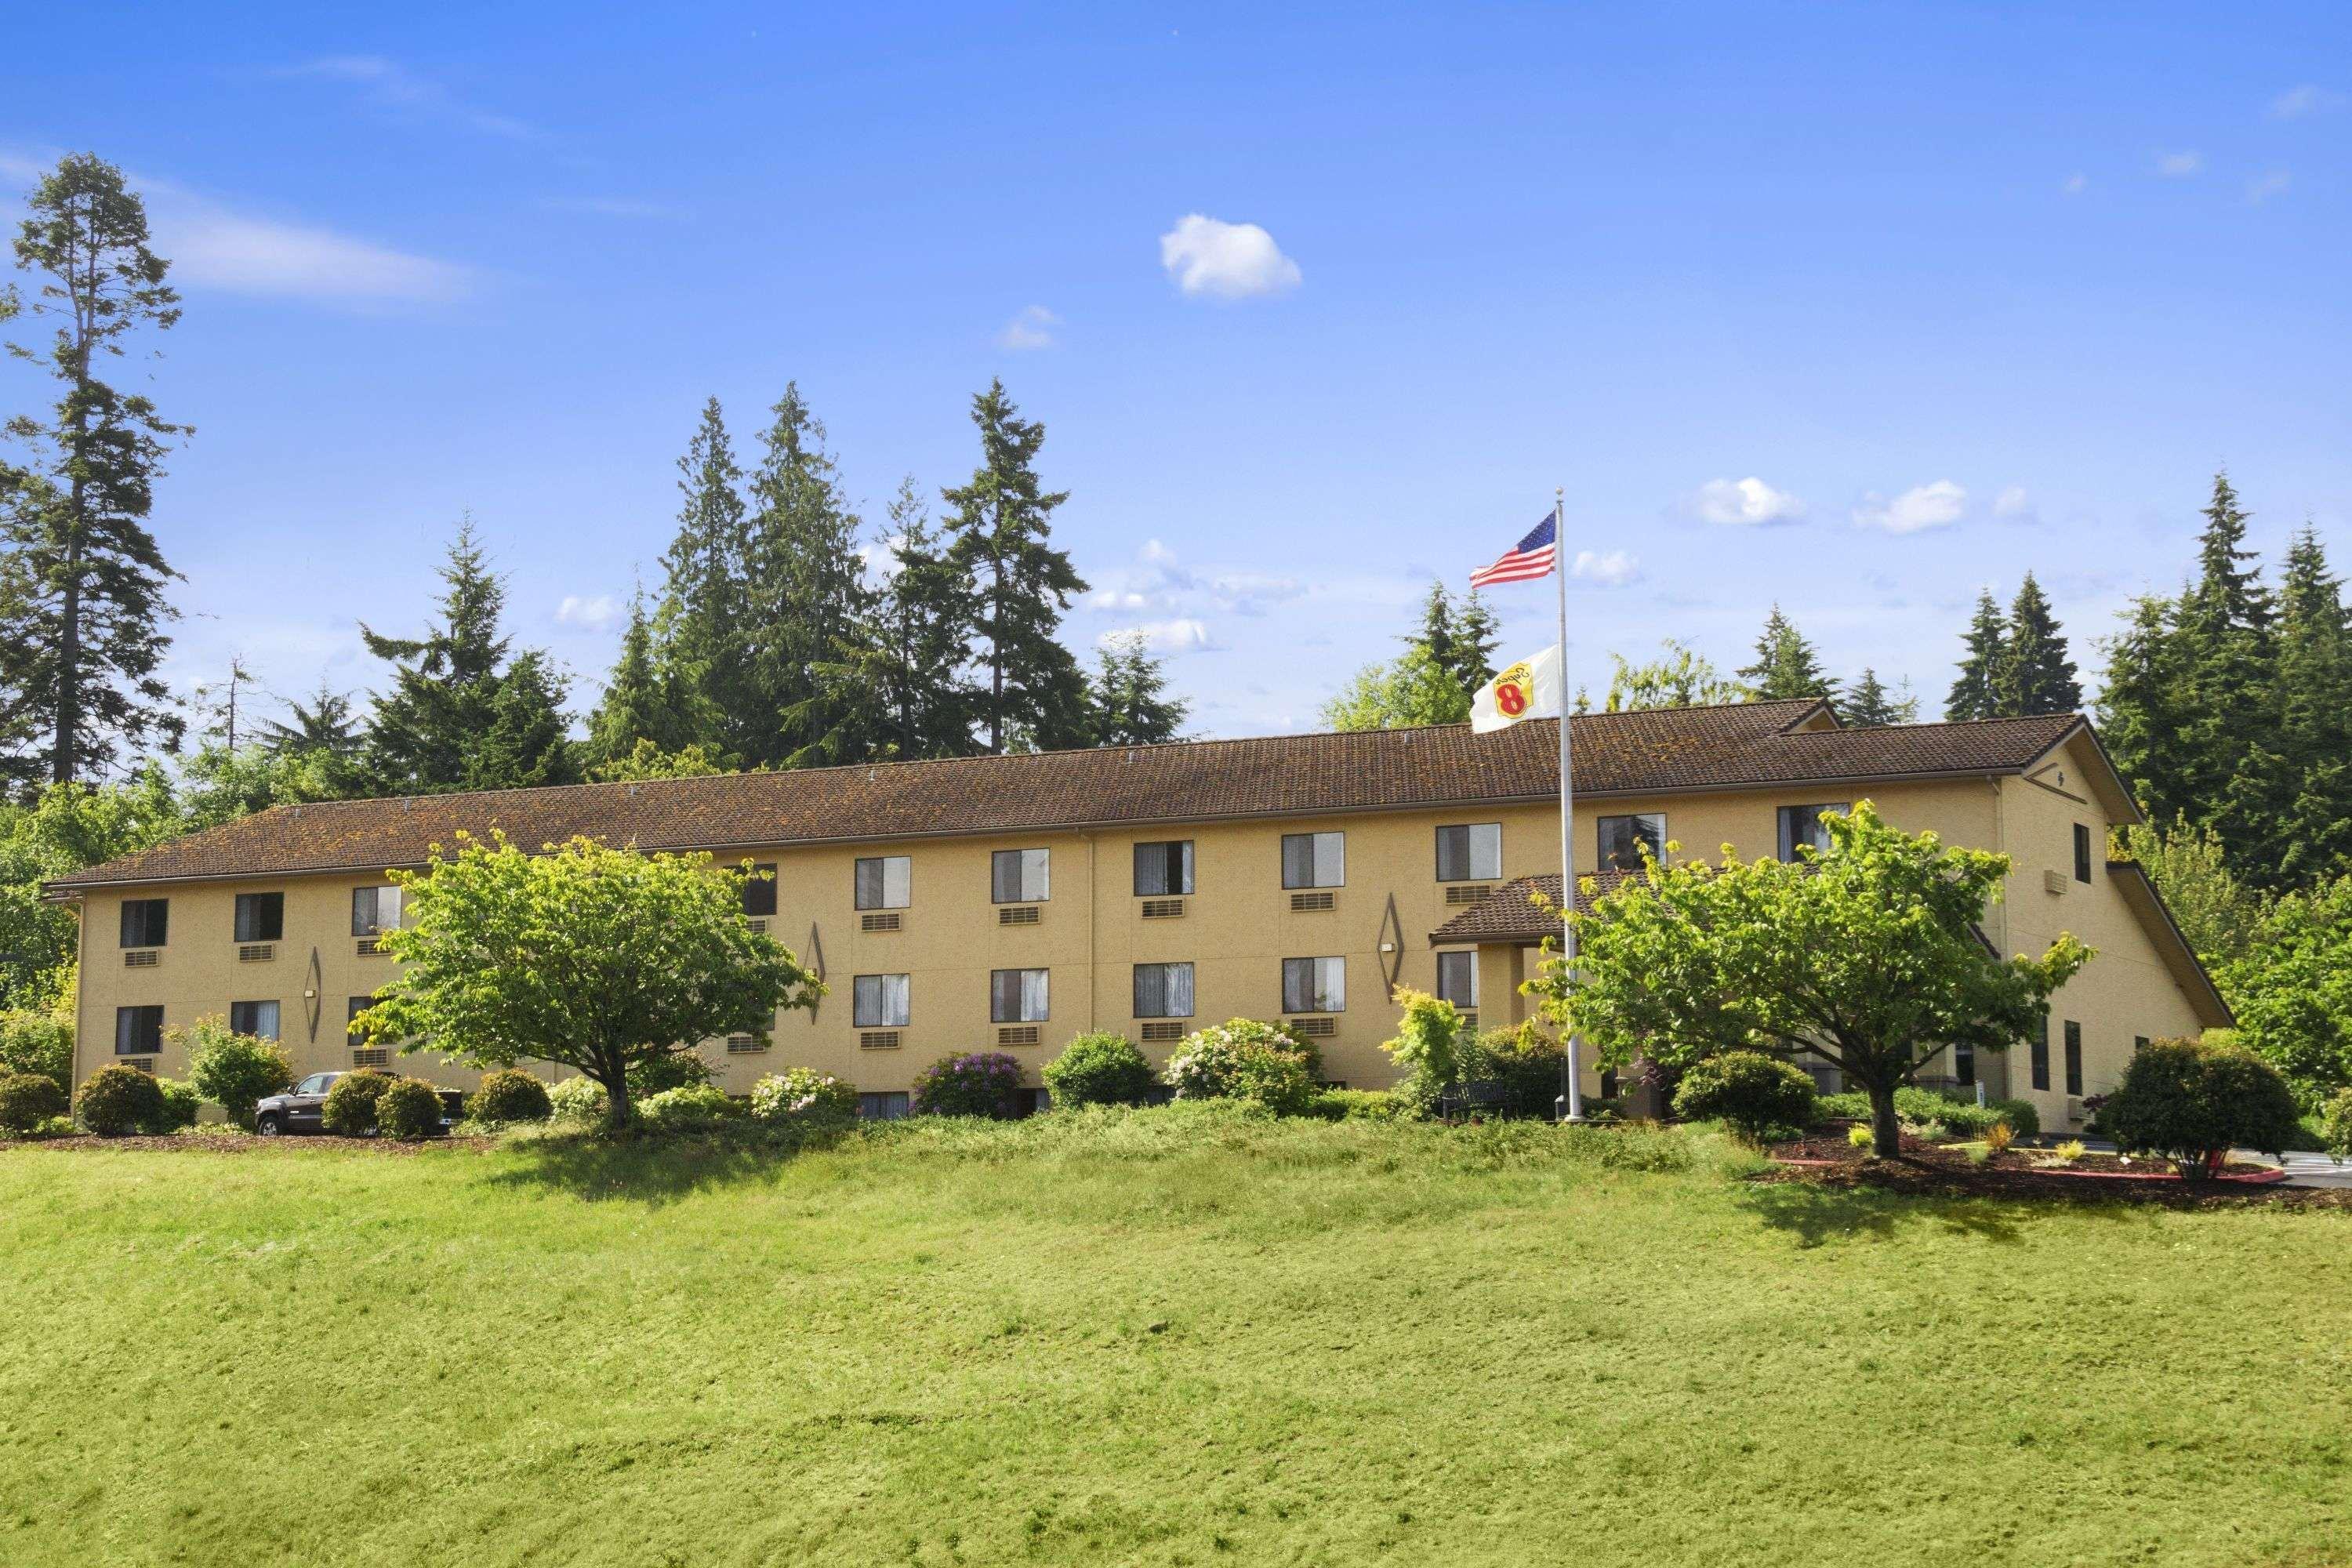 Super 8 By Wyndham Port Angeles At Olympic National Park Motel Exterior photo